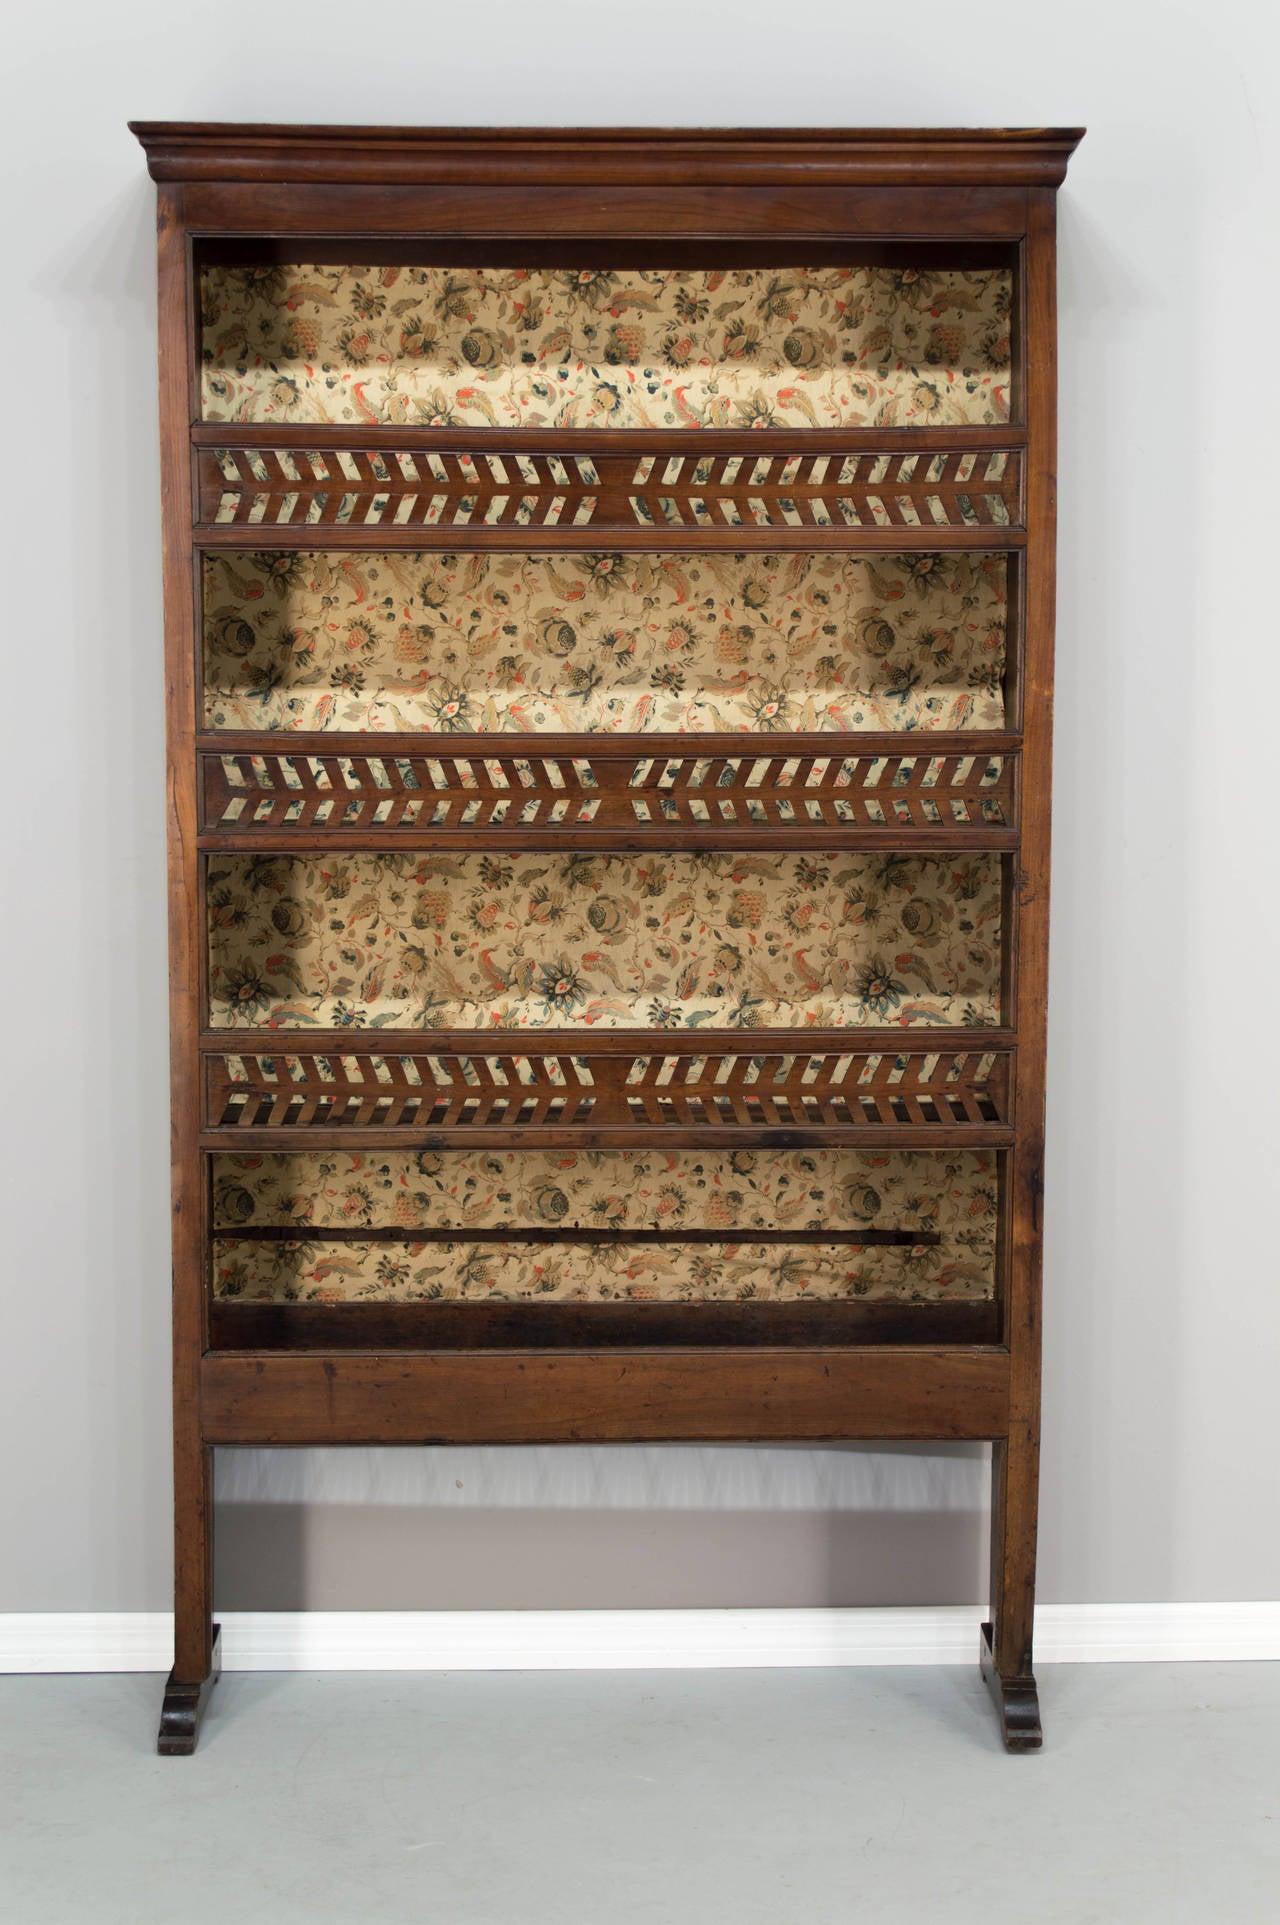 An original plate rack from the Brittany province made of cherry and chestnut with three shelves for displaying some dishes with a carved front gallery representing a fish bones and a lower shelf for drying some dishes with a spoon holder. All